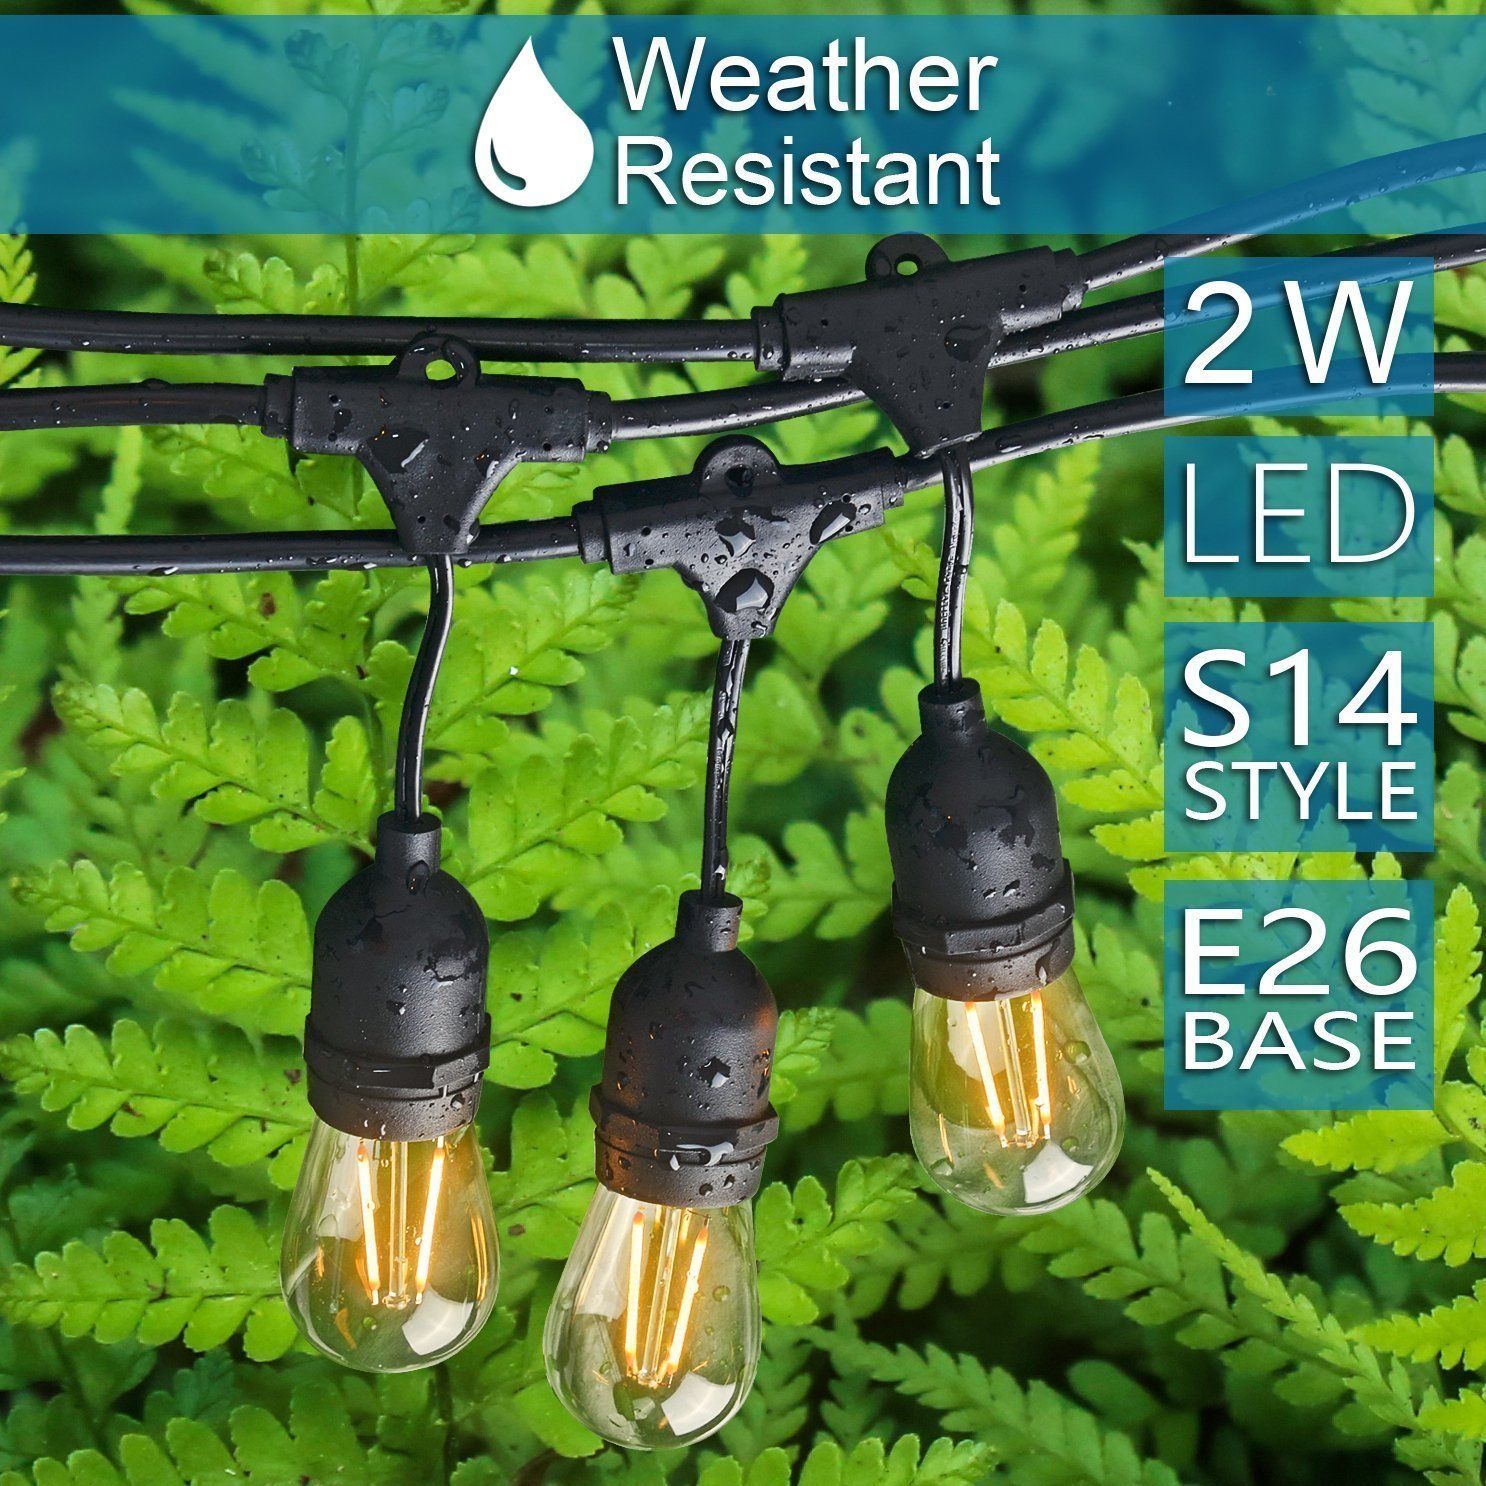 DIGITNOW LED Outdoor String Lights 30Ft with 9 Hanging Sockets Cafe Vintage Bistro Weatherproof Strand for Porch Patio Garden 2W